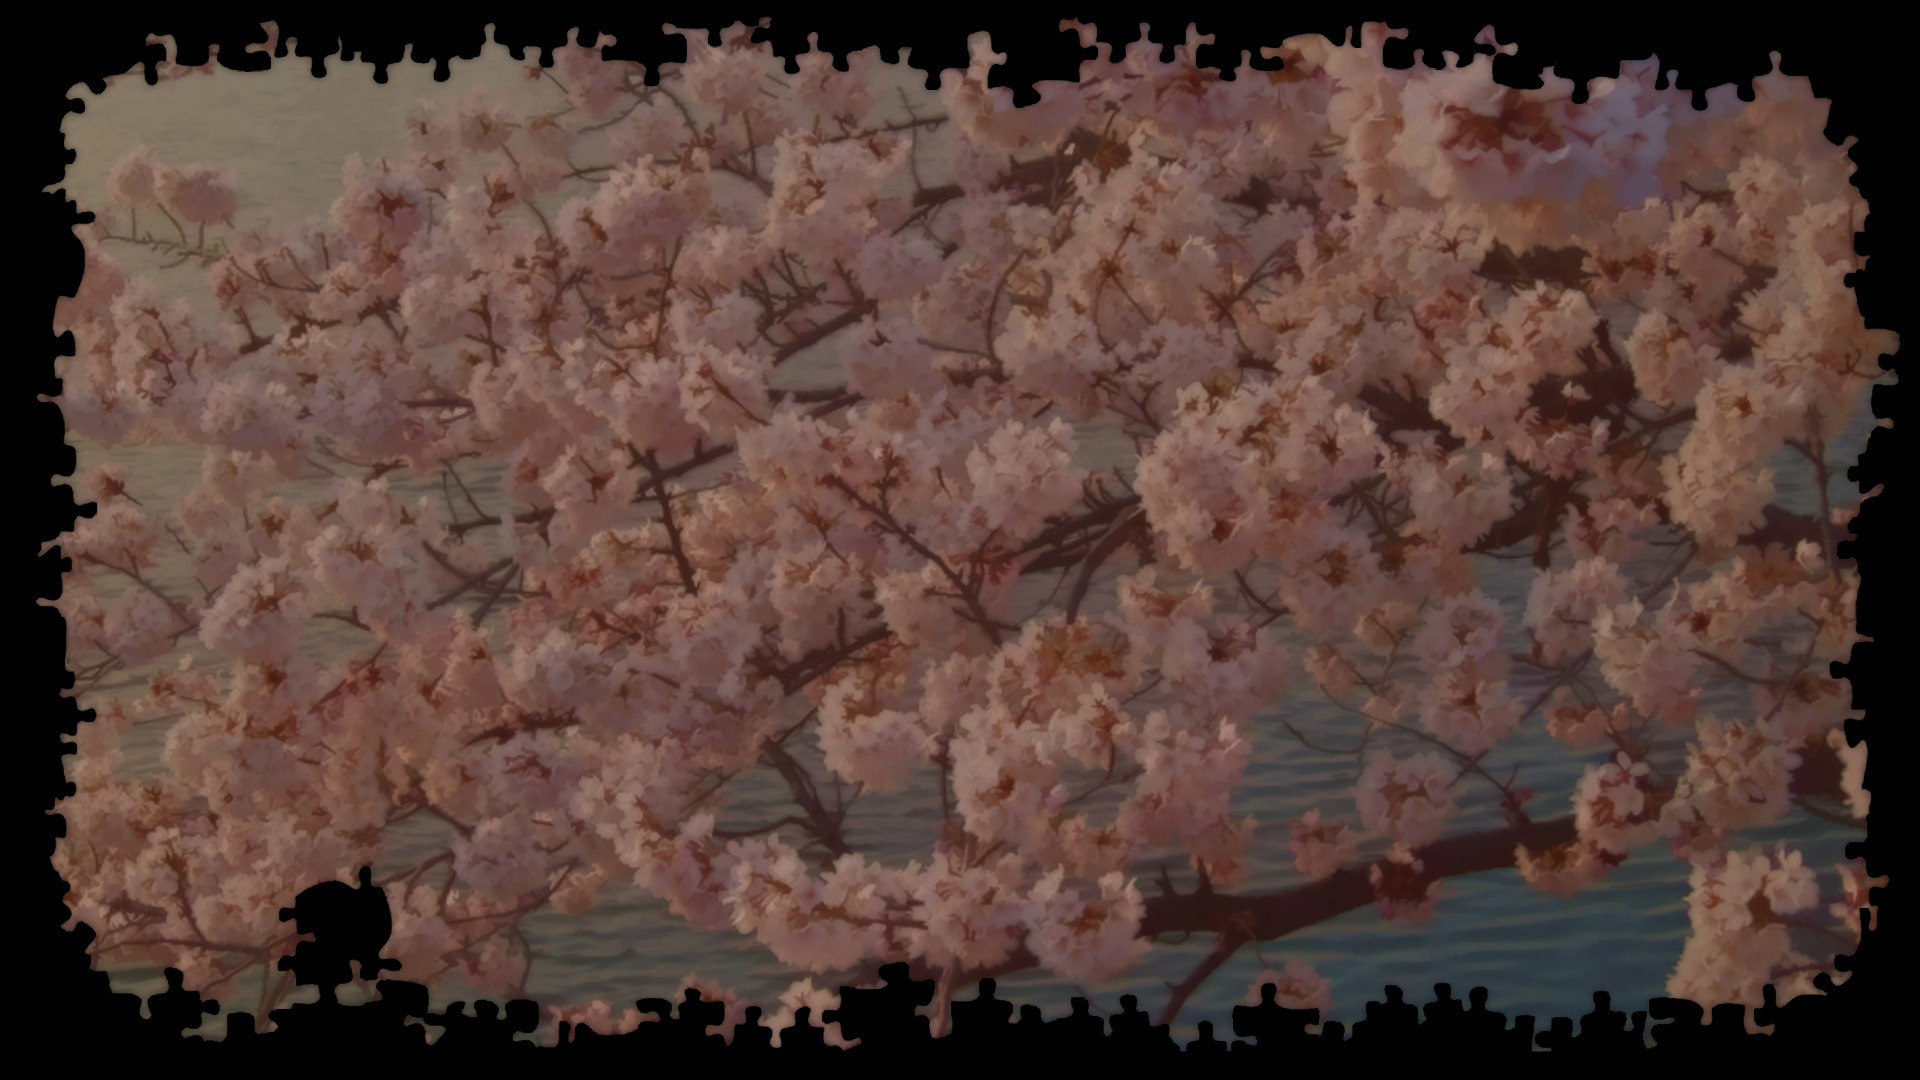 1920x1080 Pixel Puzzles Japan Background Cherry Blossom Water.jpg